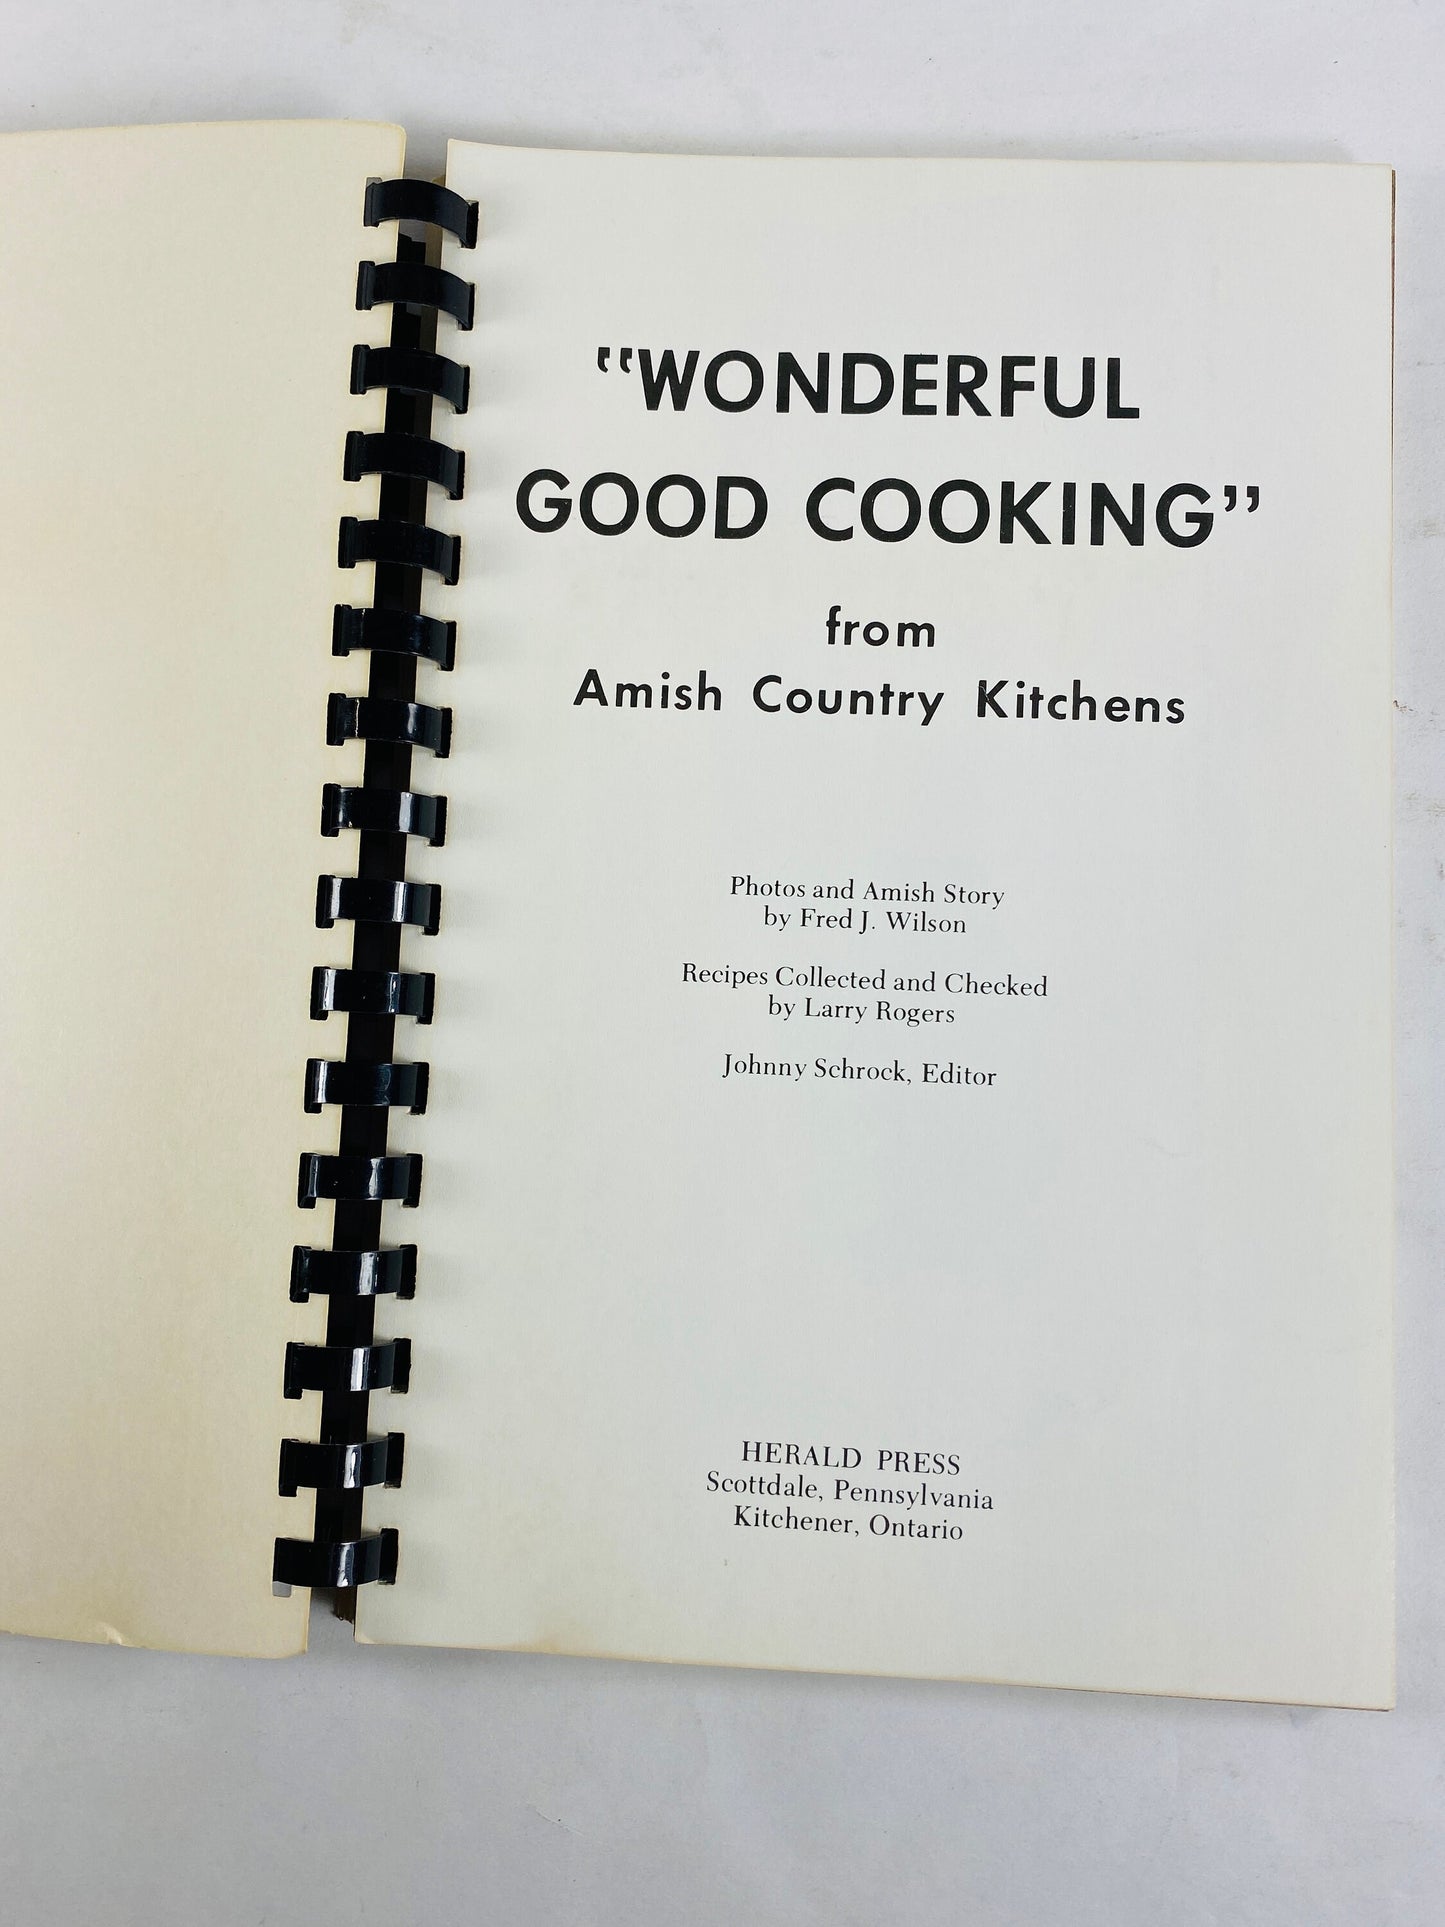 Pennsylvania Dutch Cookbook Wonderful Good Cooking from Amish Country Kitchens vintage cookbook recipes circa 1975 Quaker PA Old Fashioned